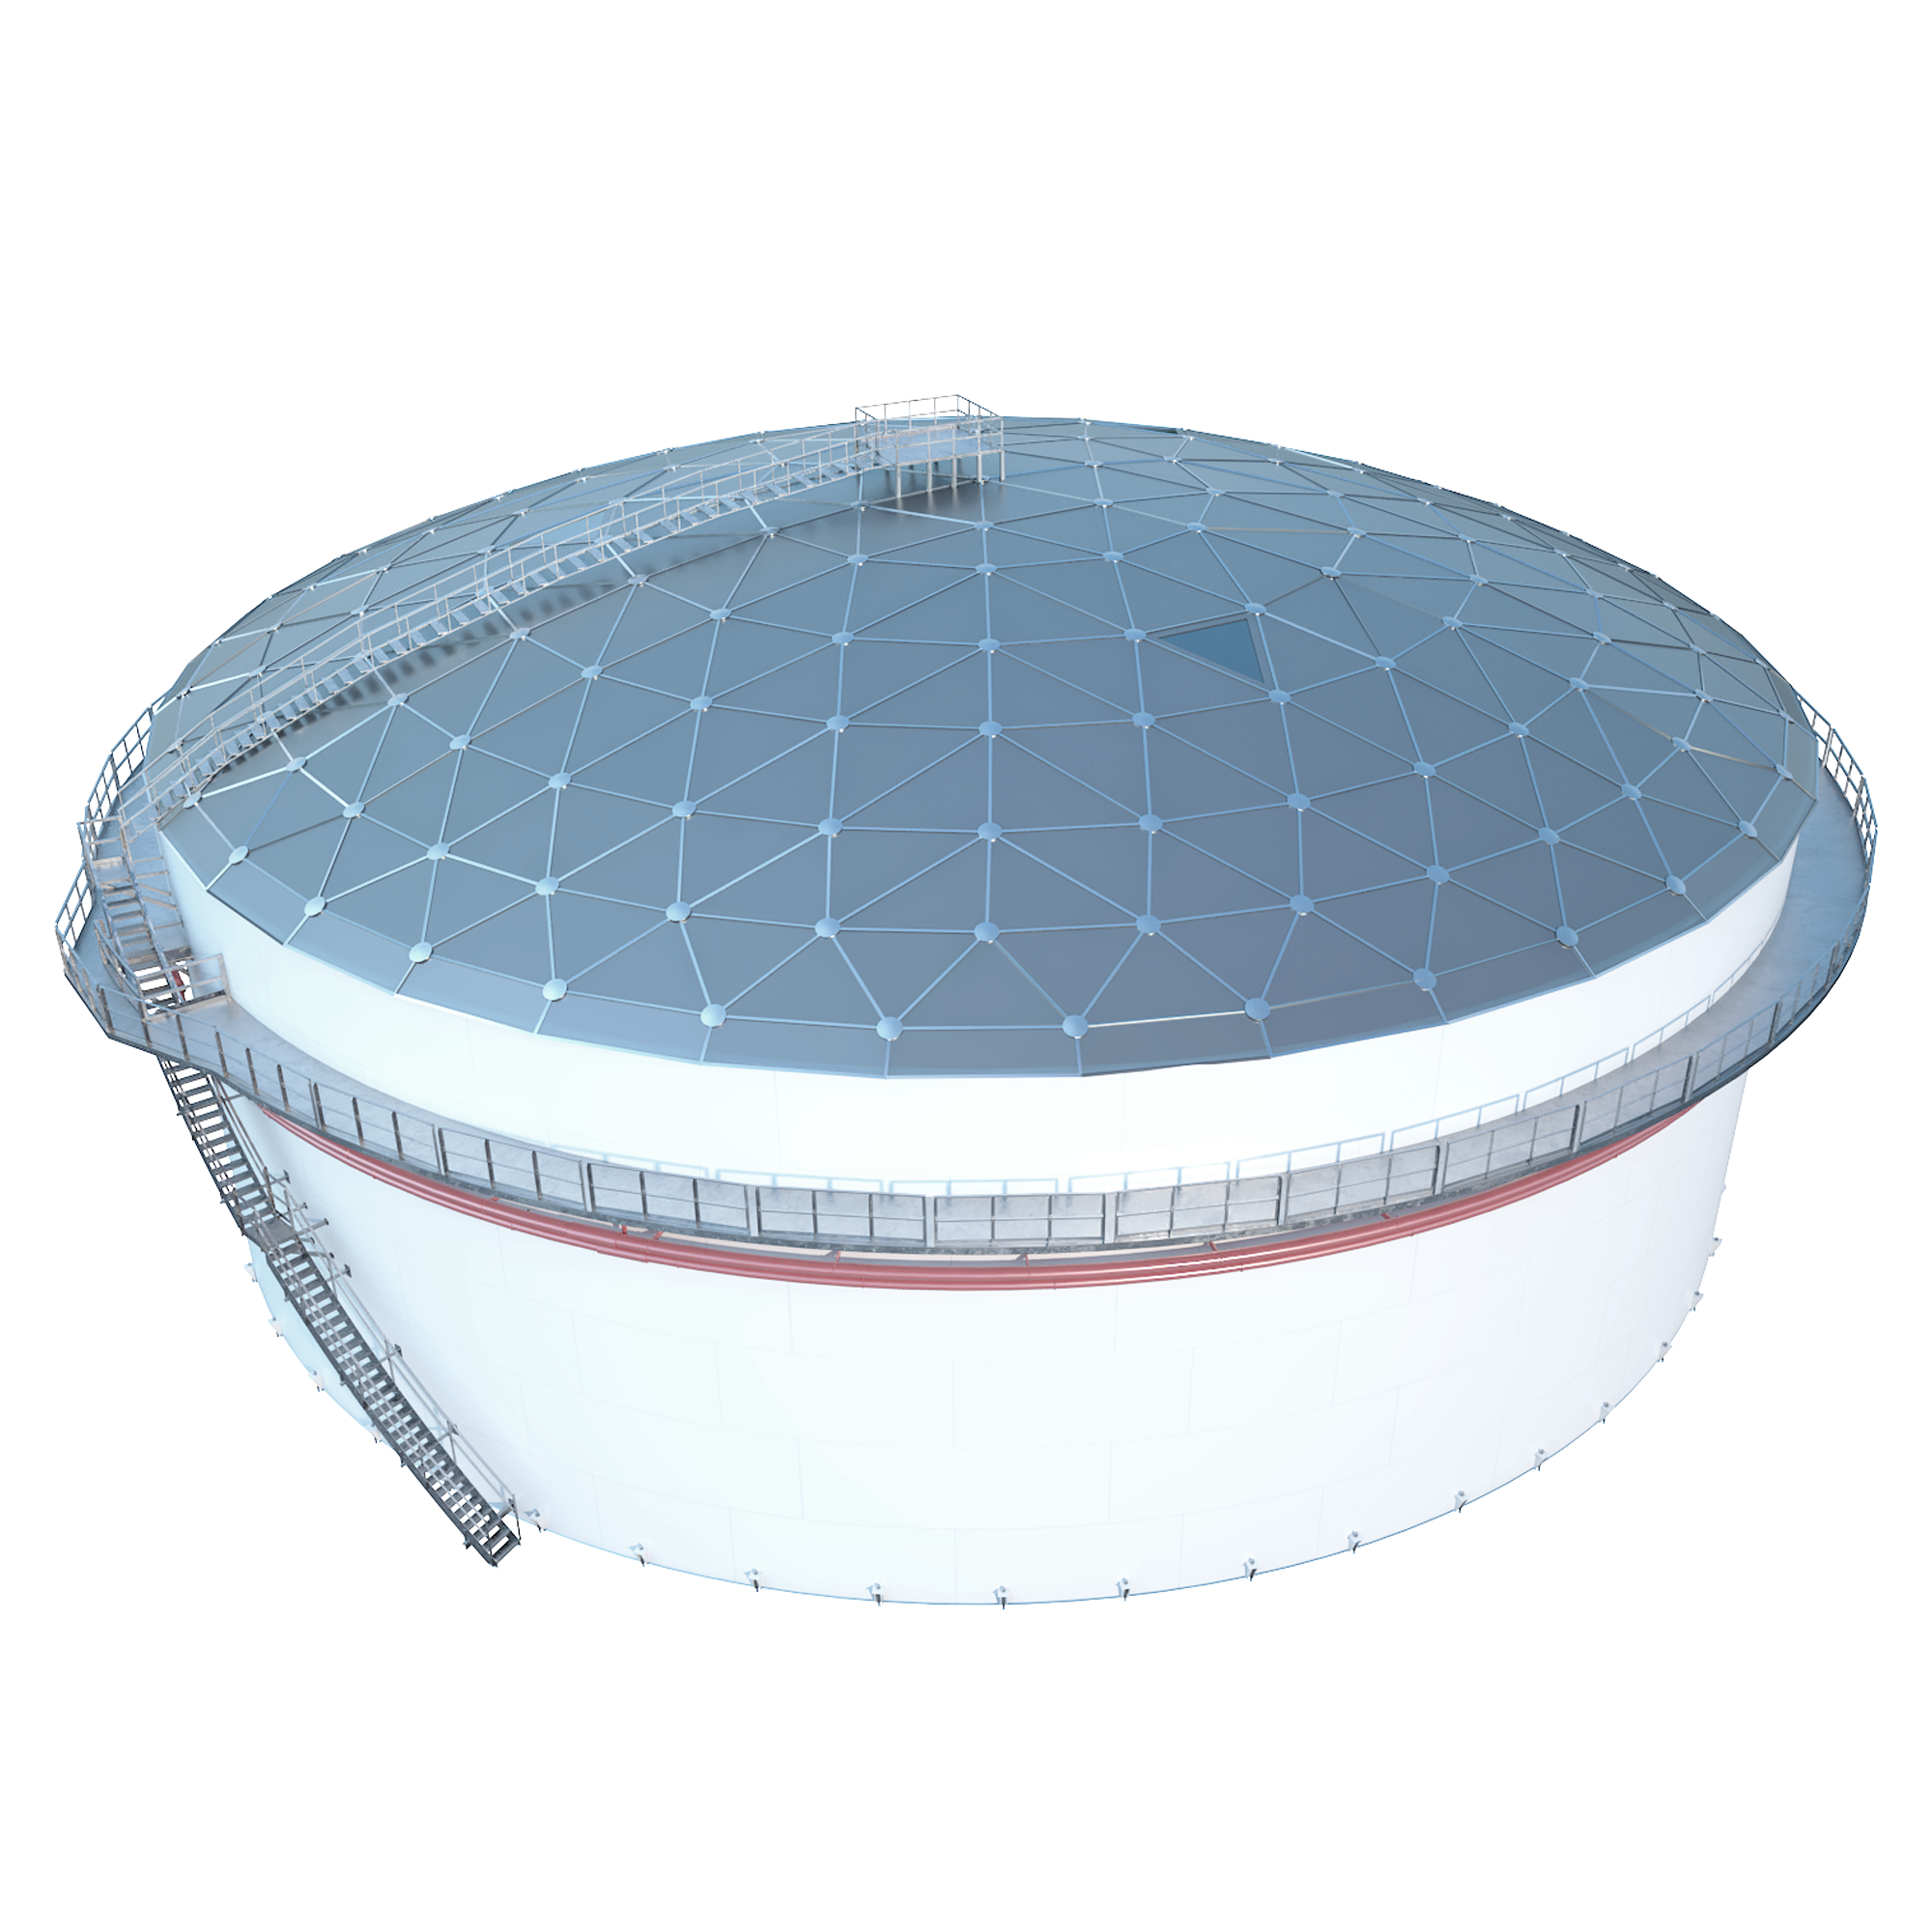 Reliable Storage Tank Solutions with Äager GmbH's Aluminum Dome